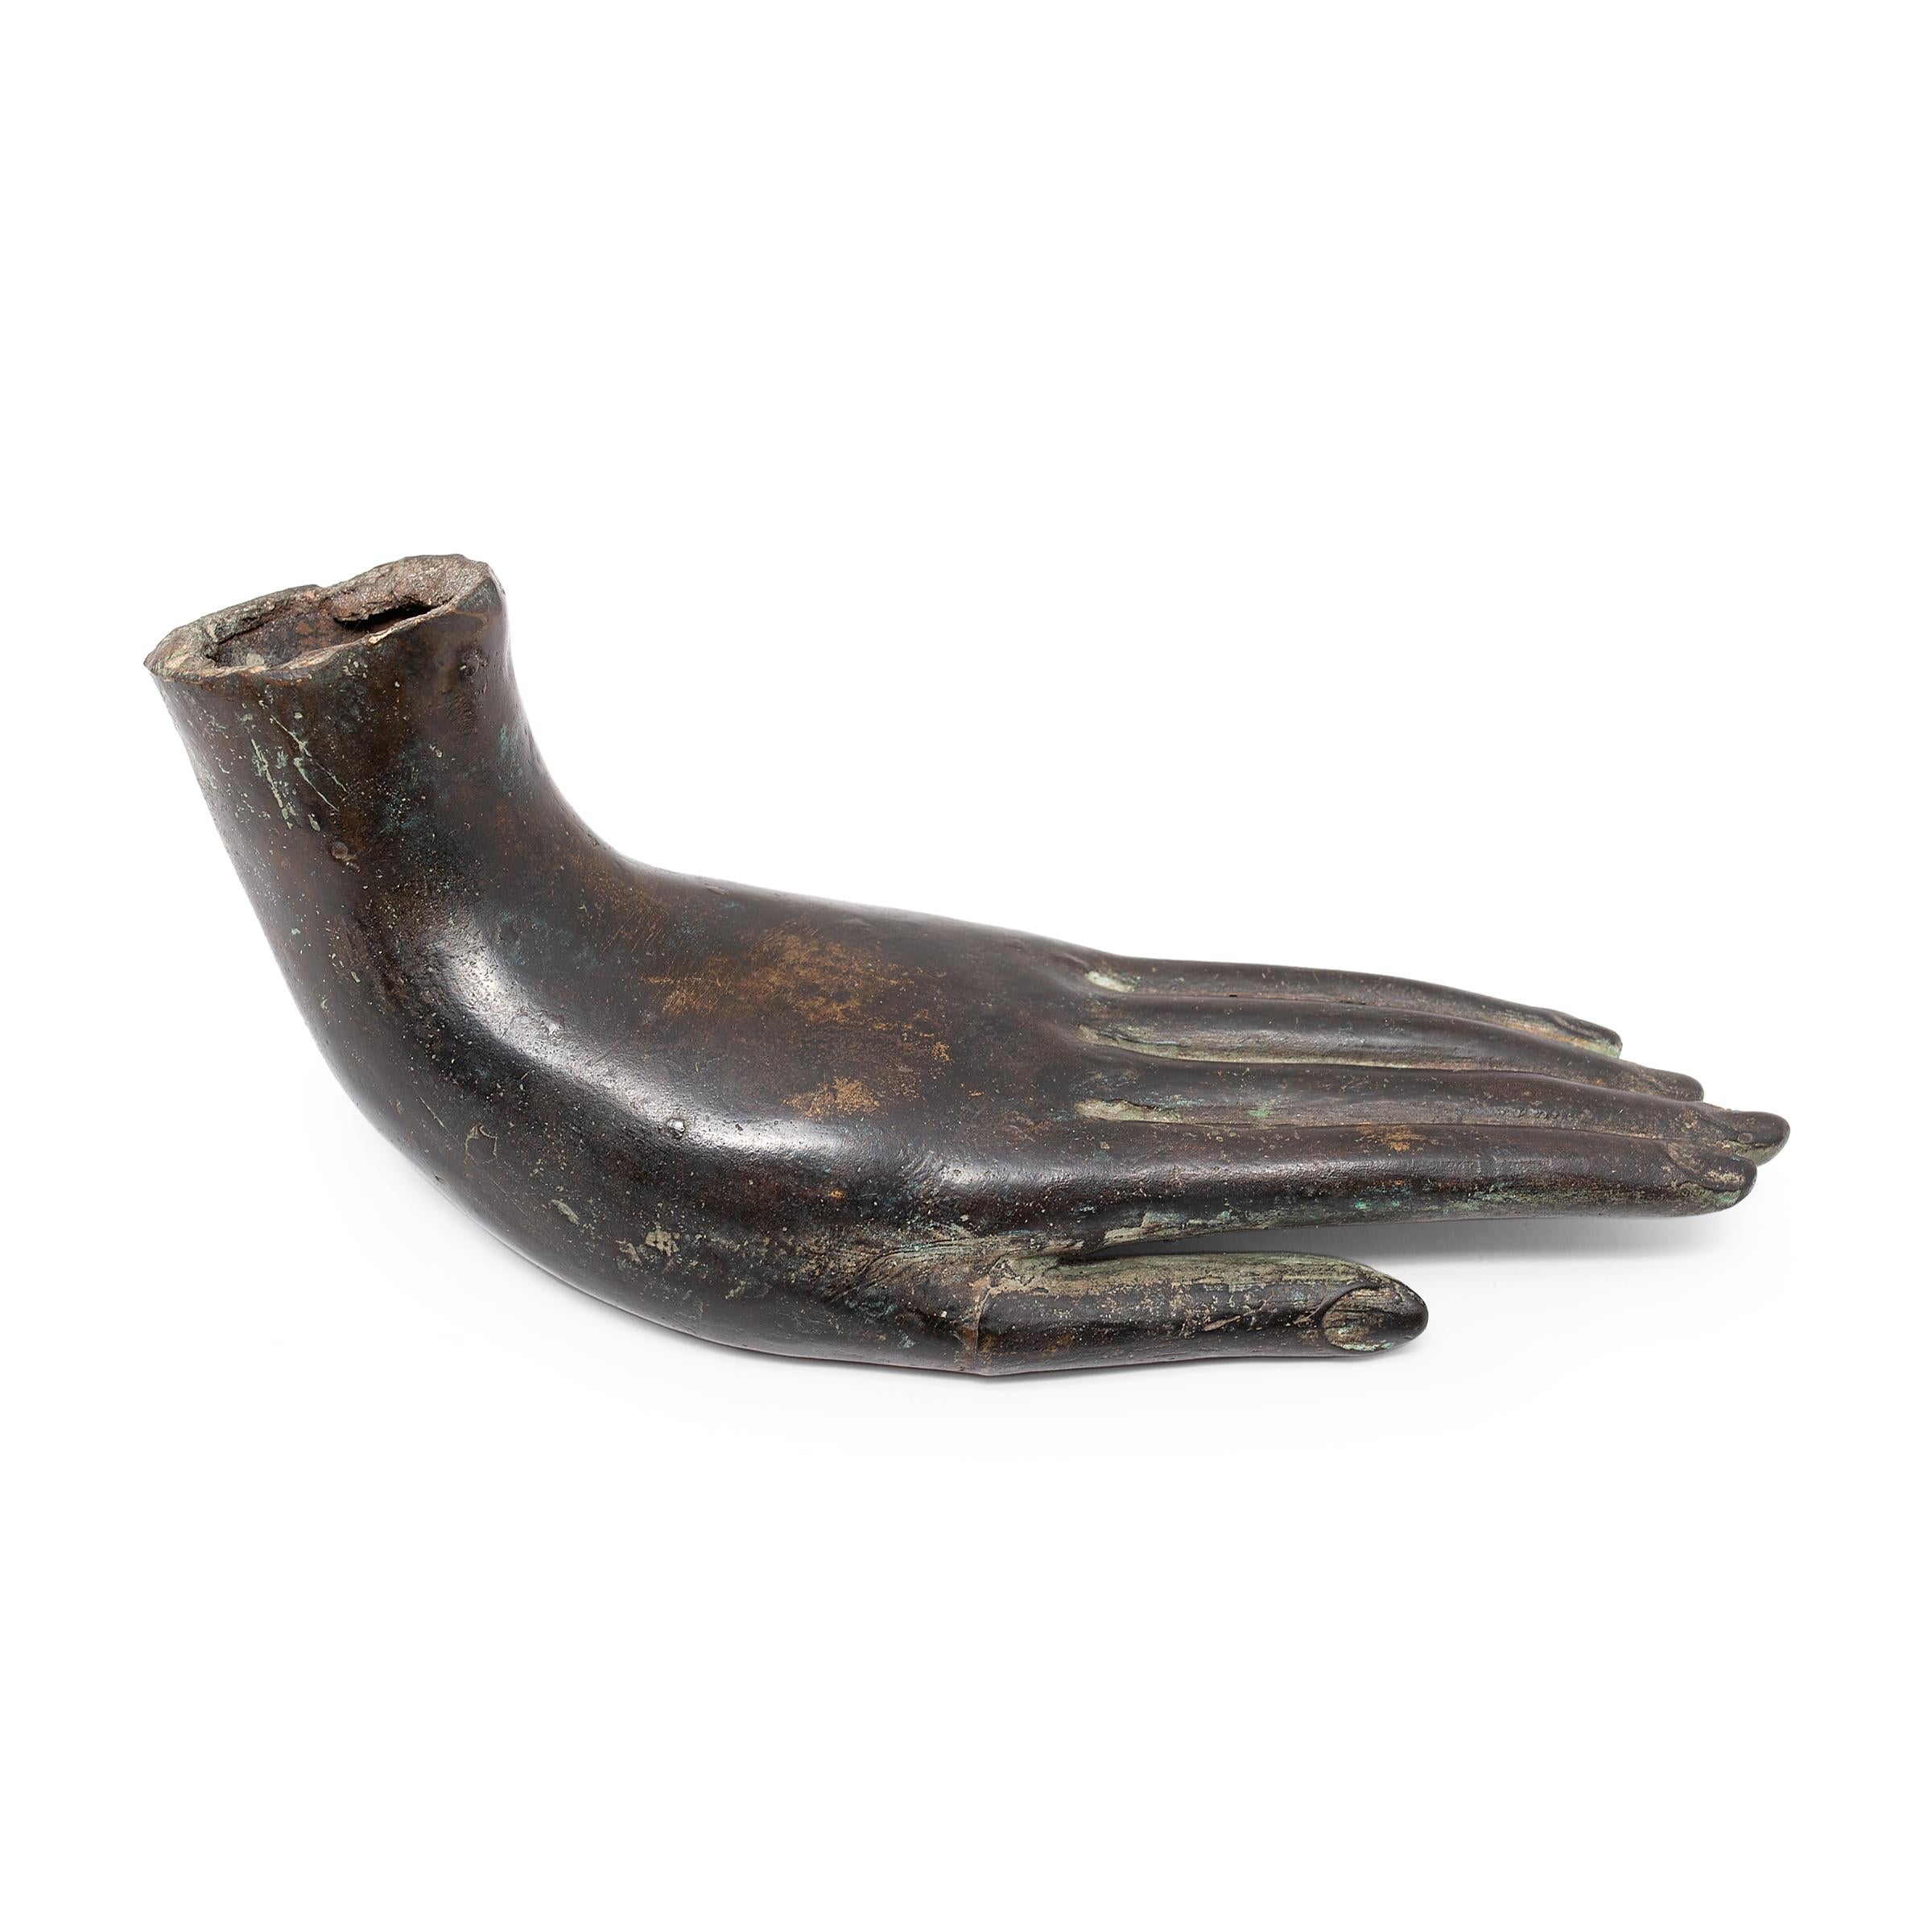 This 19th-century Buddha's hand sculpture from Thailand is finely cast of bronze with lifelike features and a beautifully dark patina. The slender left hand is held gracefully in varada mudra, the gesture of mercy and compassion, with wrist bent and